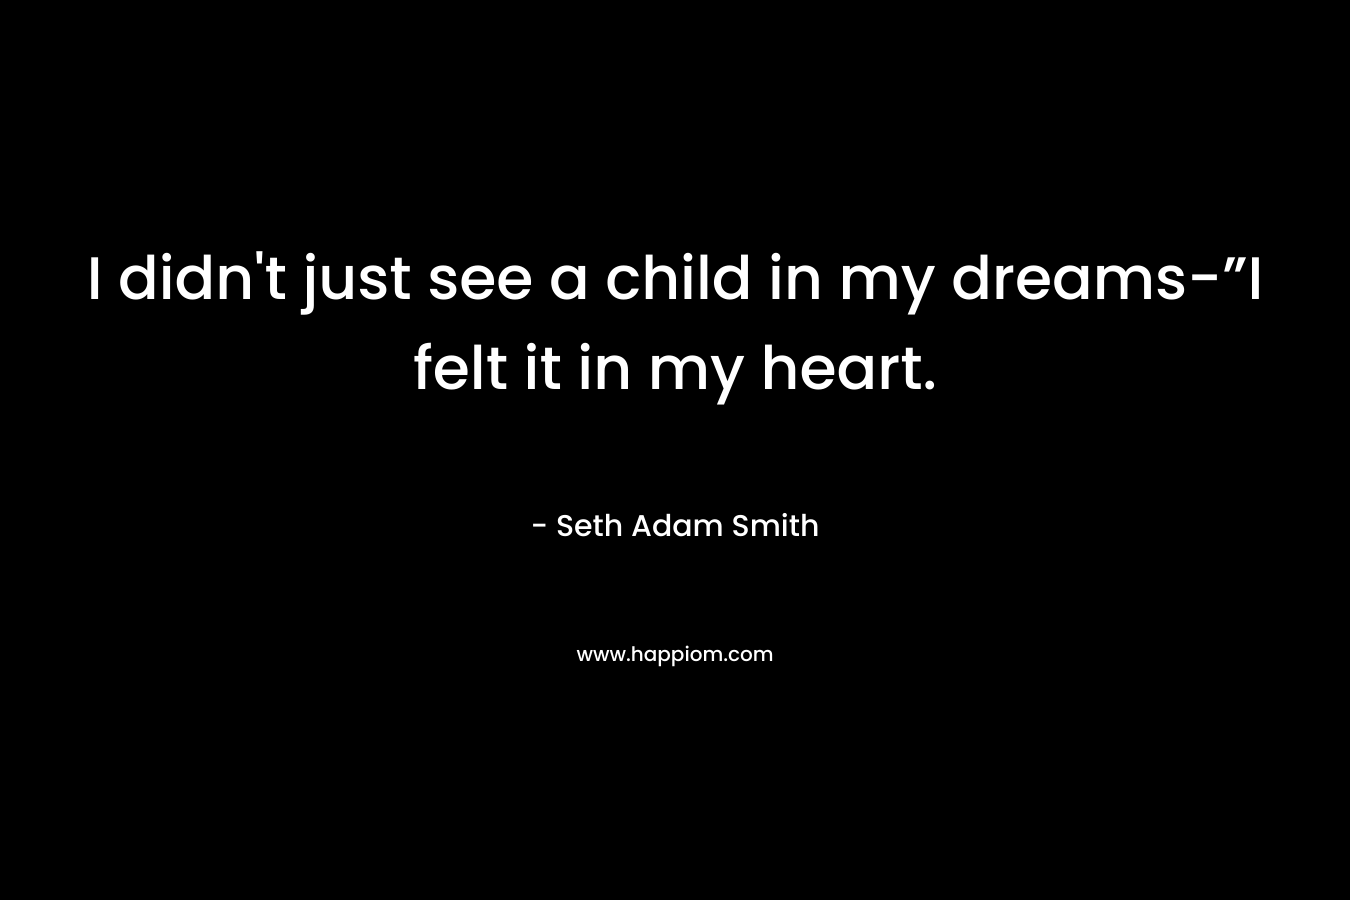 I didn't just see a child in my dreams-”I felt it in my heart.